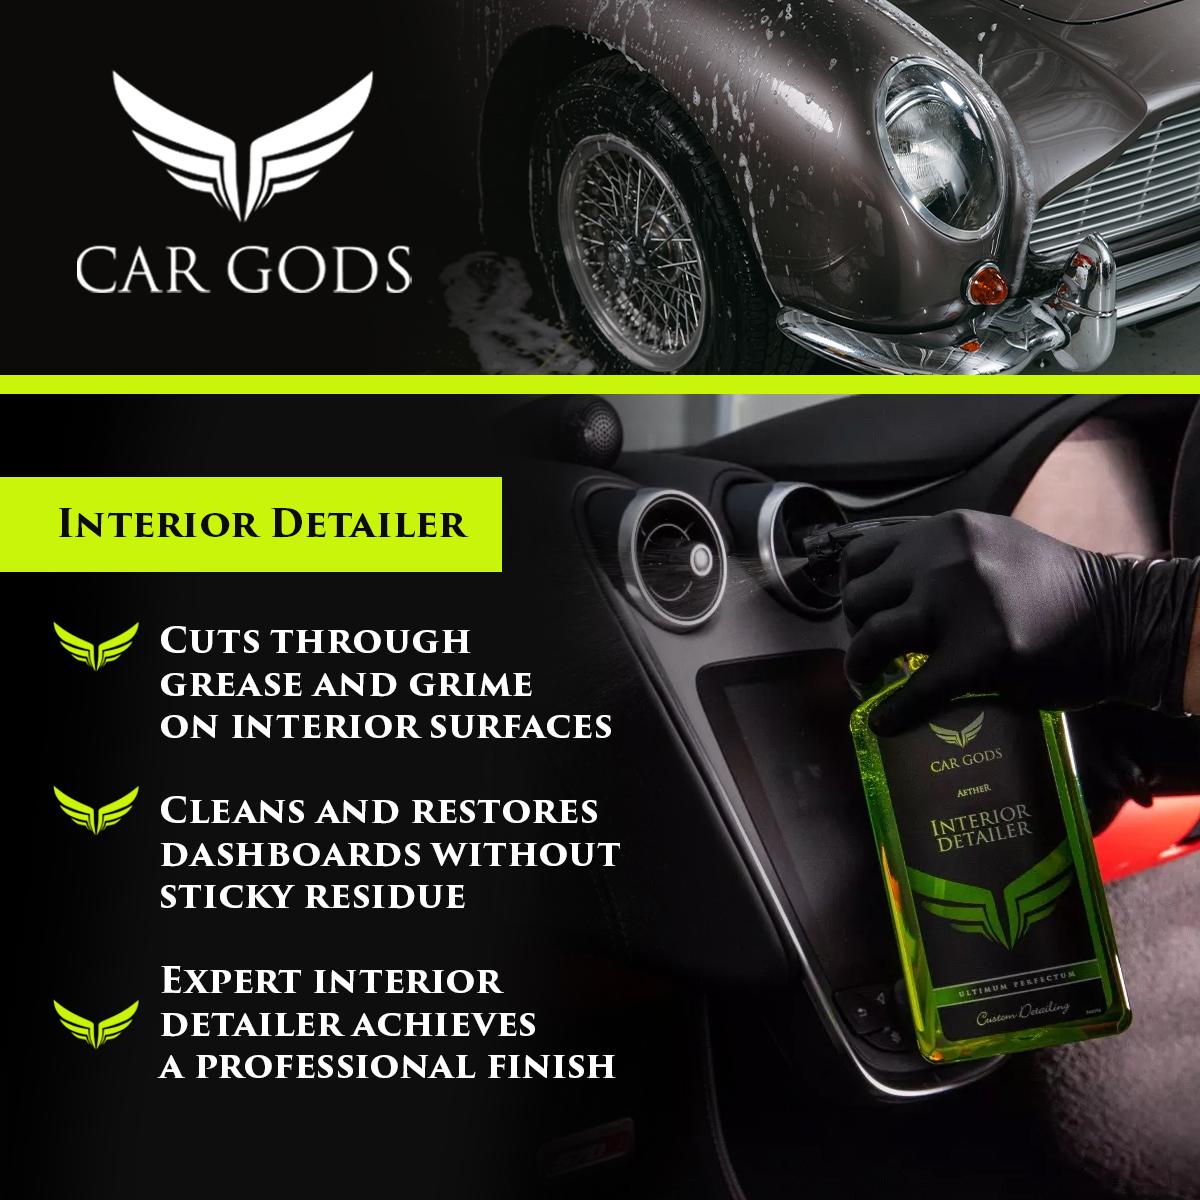 Car Gods Interior Detailer. Cuts through grease and grime to clean and restore your car’s interior surfaces. Interior Detailer offers a professional finish and a heavenly apple-scent.